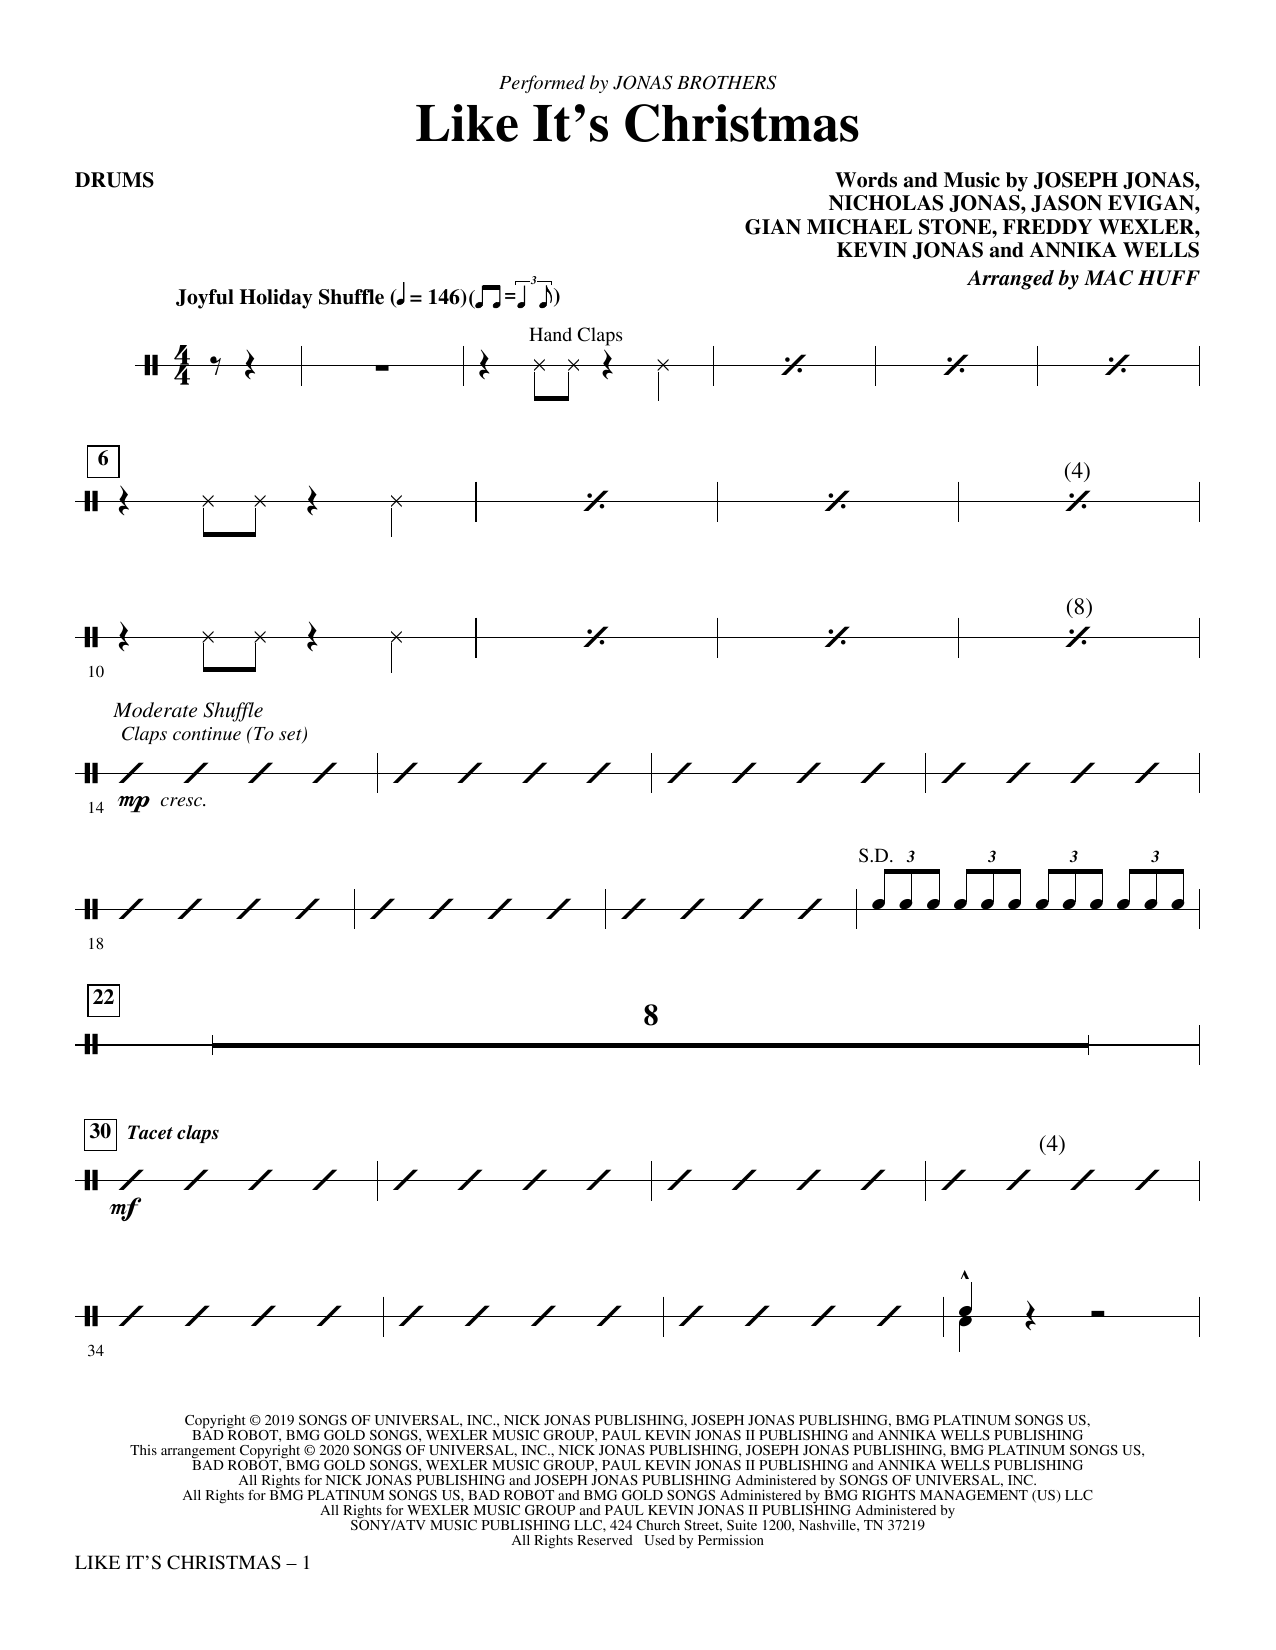 Jonas Brothers Like It's Christmas (arr. Mac Huff) - Drums sheet music preview music notes and score for Choir Instrumental Pak including 3 page(s)